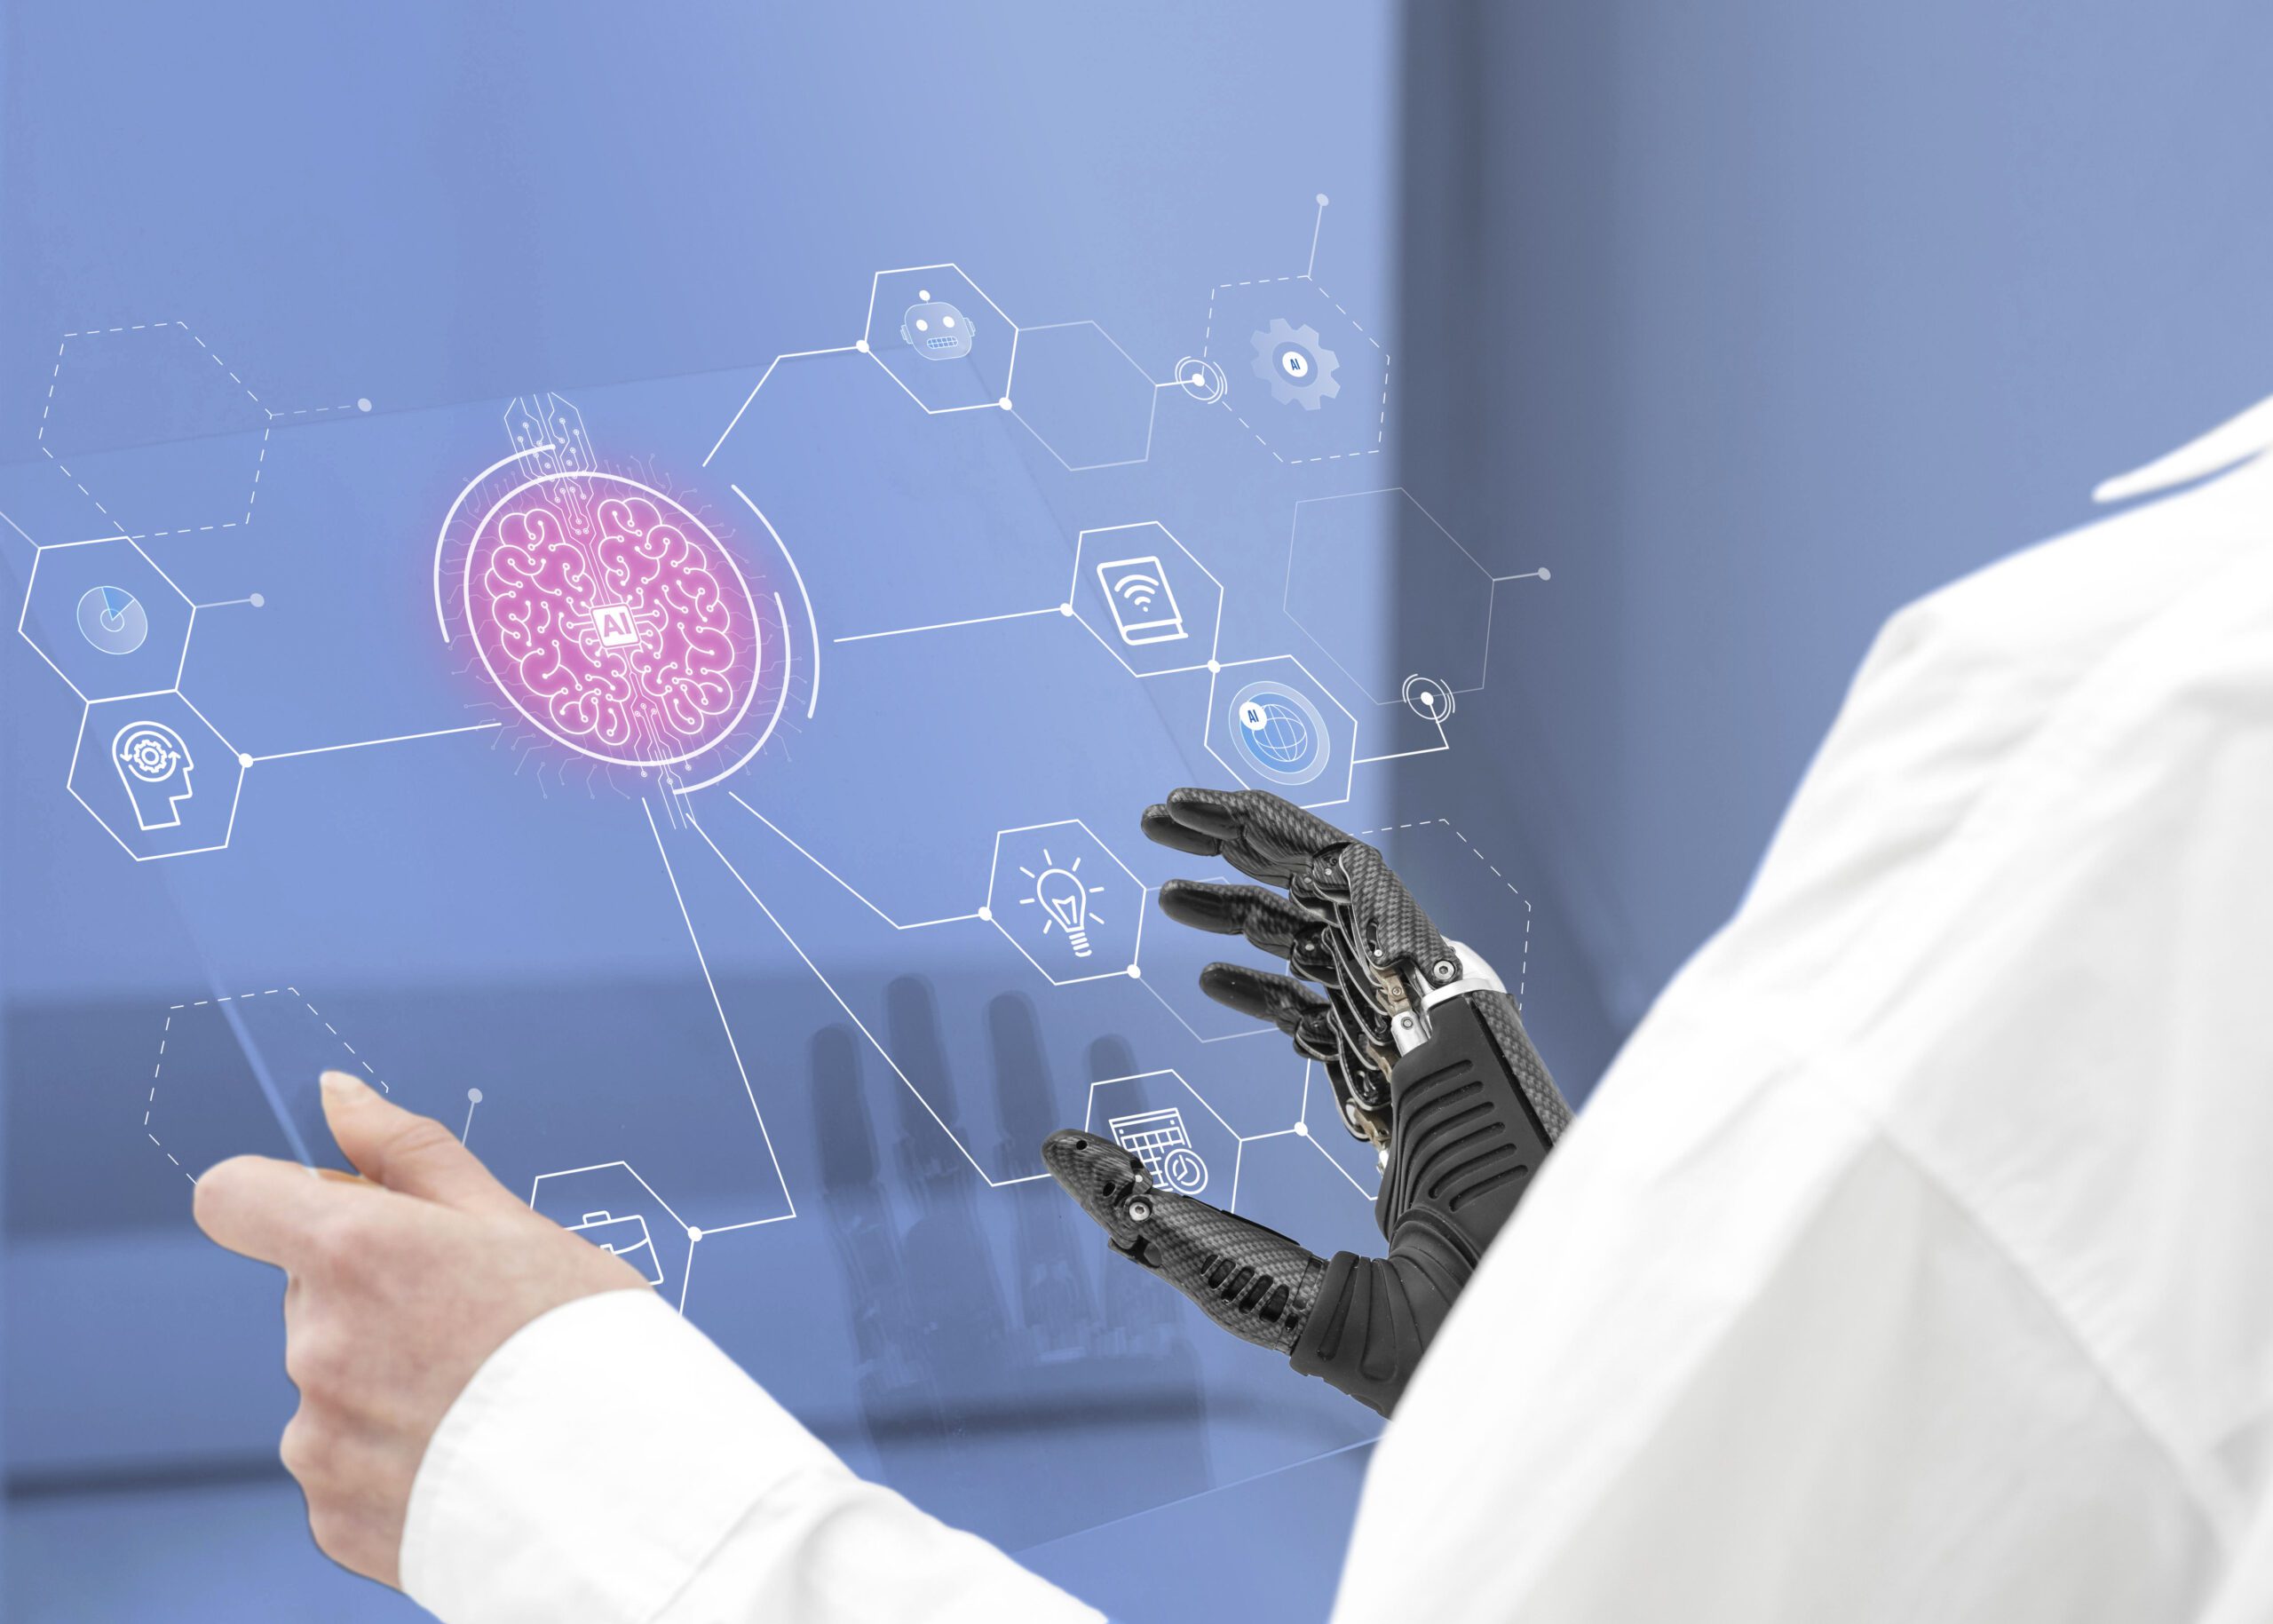 Certificate in Artificial Intelligence (AI) in healthcare